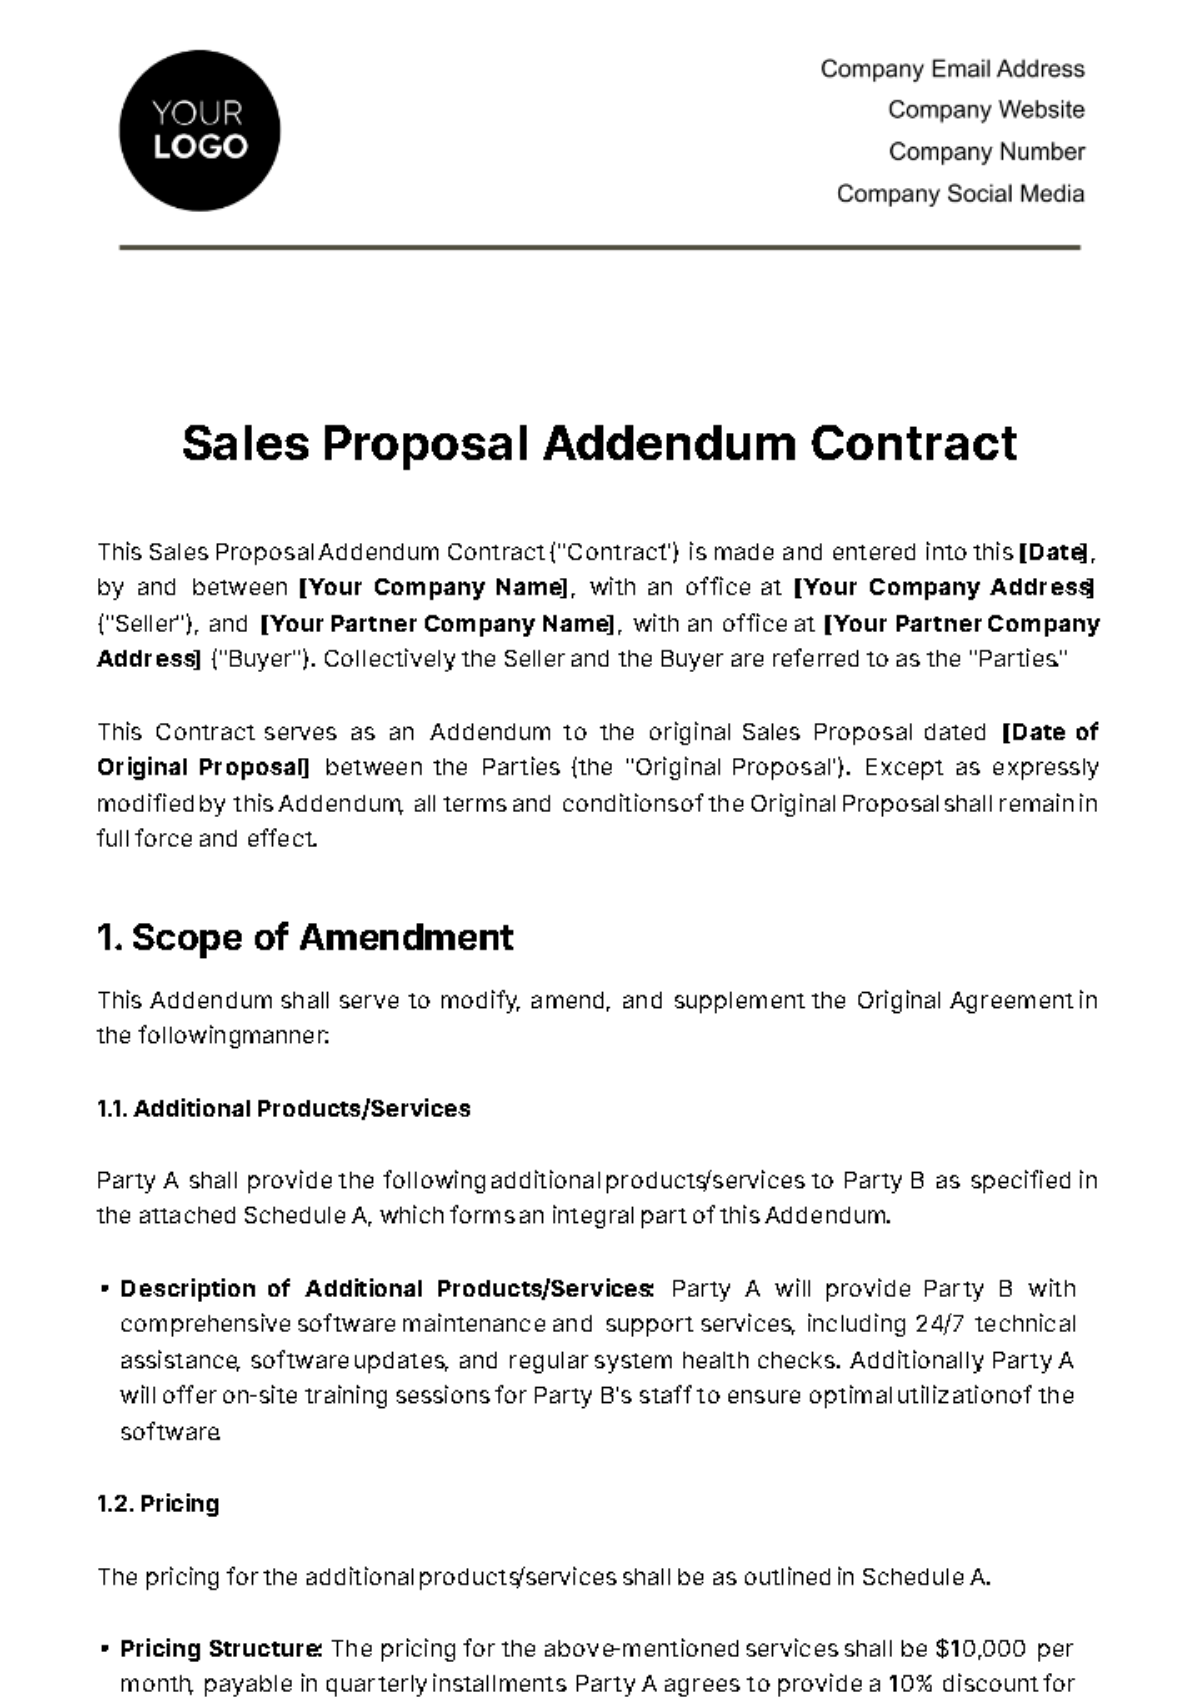 Free Sales Proposal Addendum Contract Template